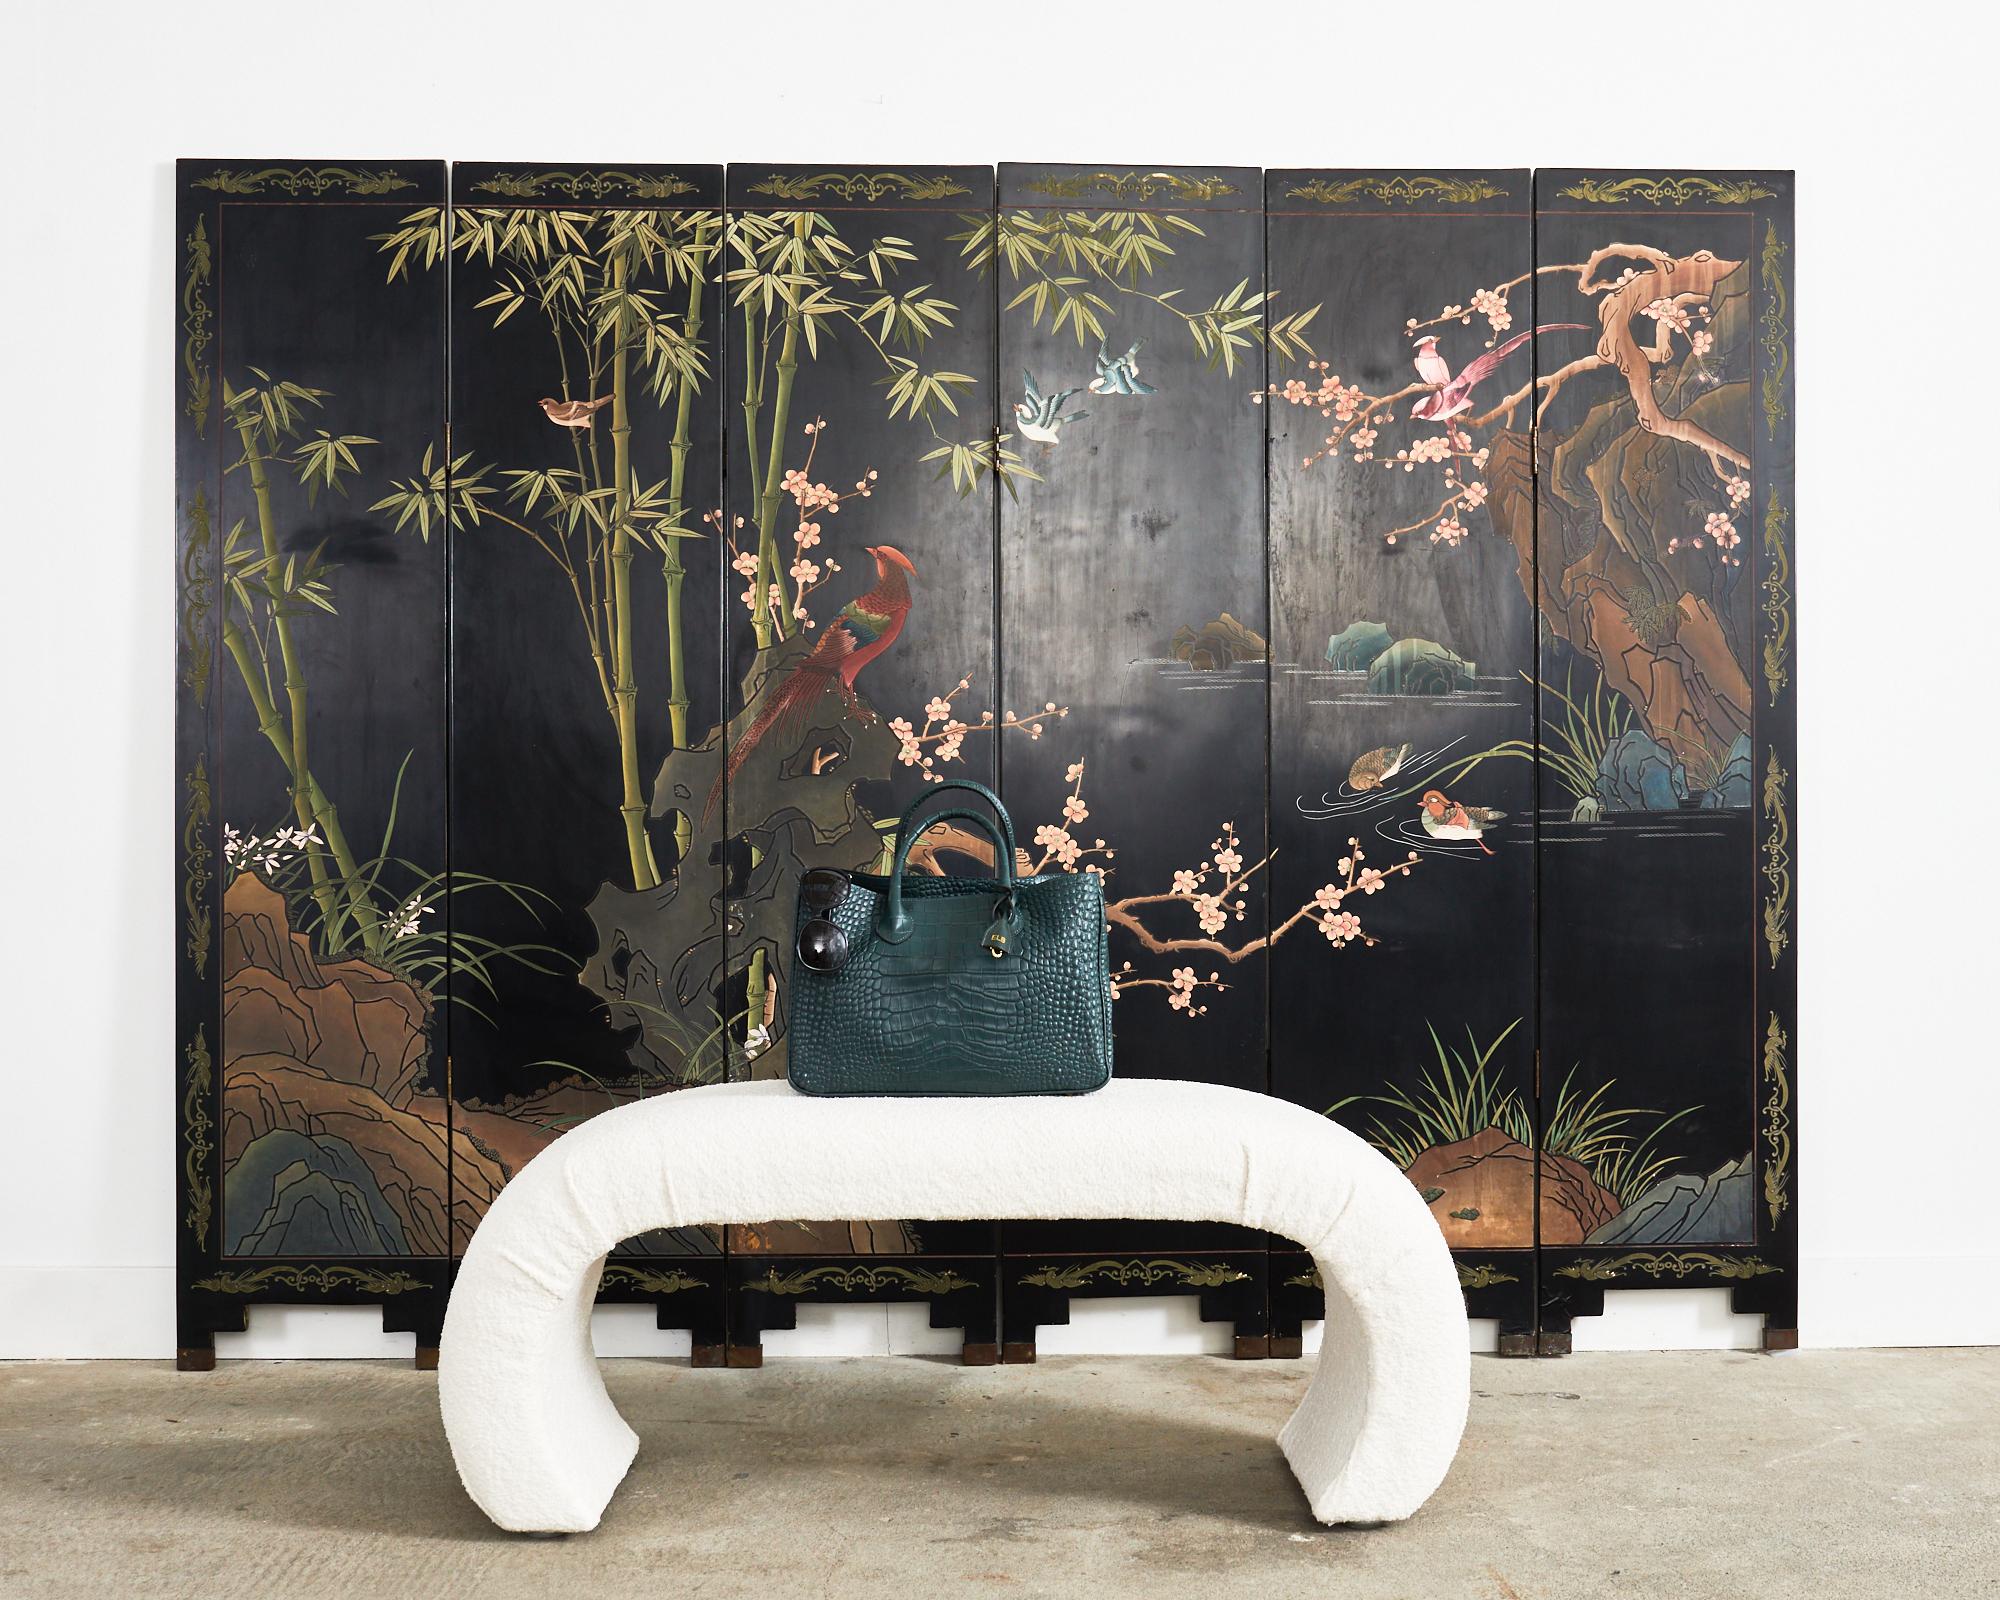 Charming Chinese export lacquered coromandel screen featuring a colorful bamboo and plum blossom water landscape with flora and fauna. The six-panel screen has thick layers of lacquer incised and painted with natural pigments in pastel style colors.